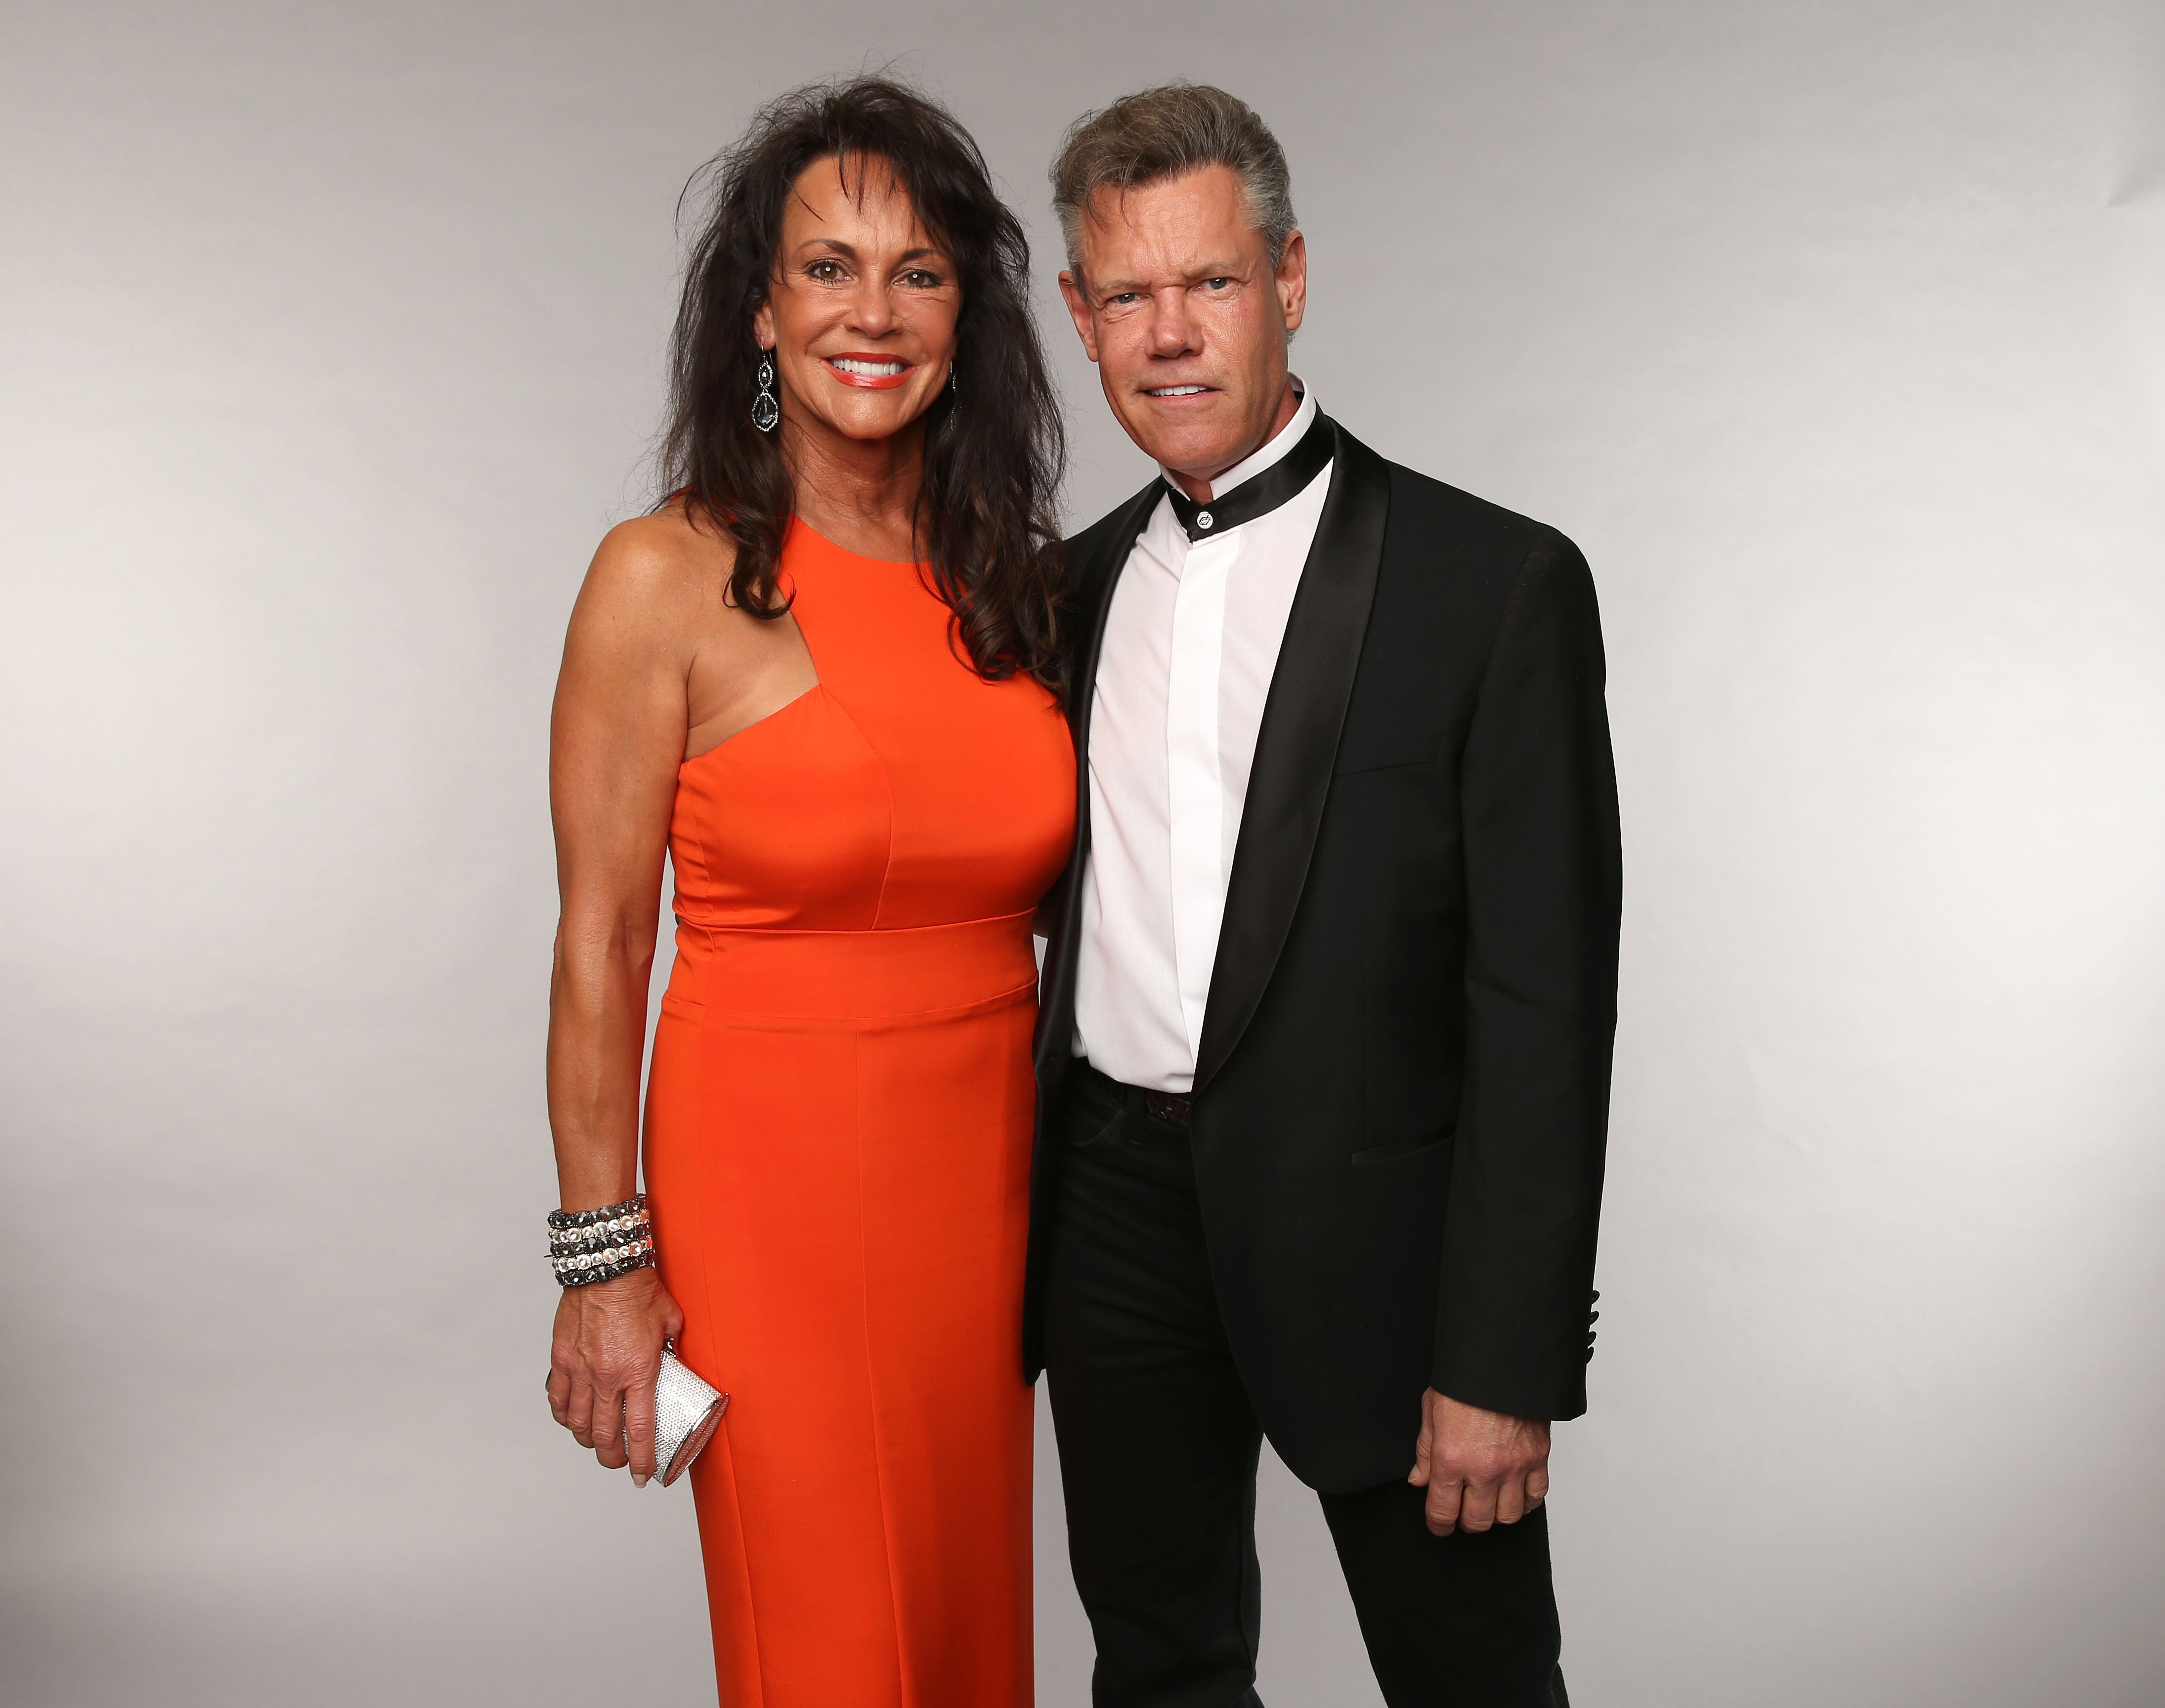 Mary Beougher and Randy Travis at the 2013 CMT Music Awards on June 5, 2013, in Nashville | Source: Getty Images